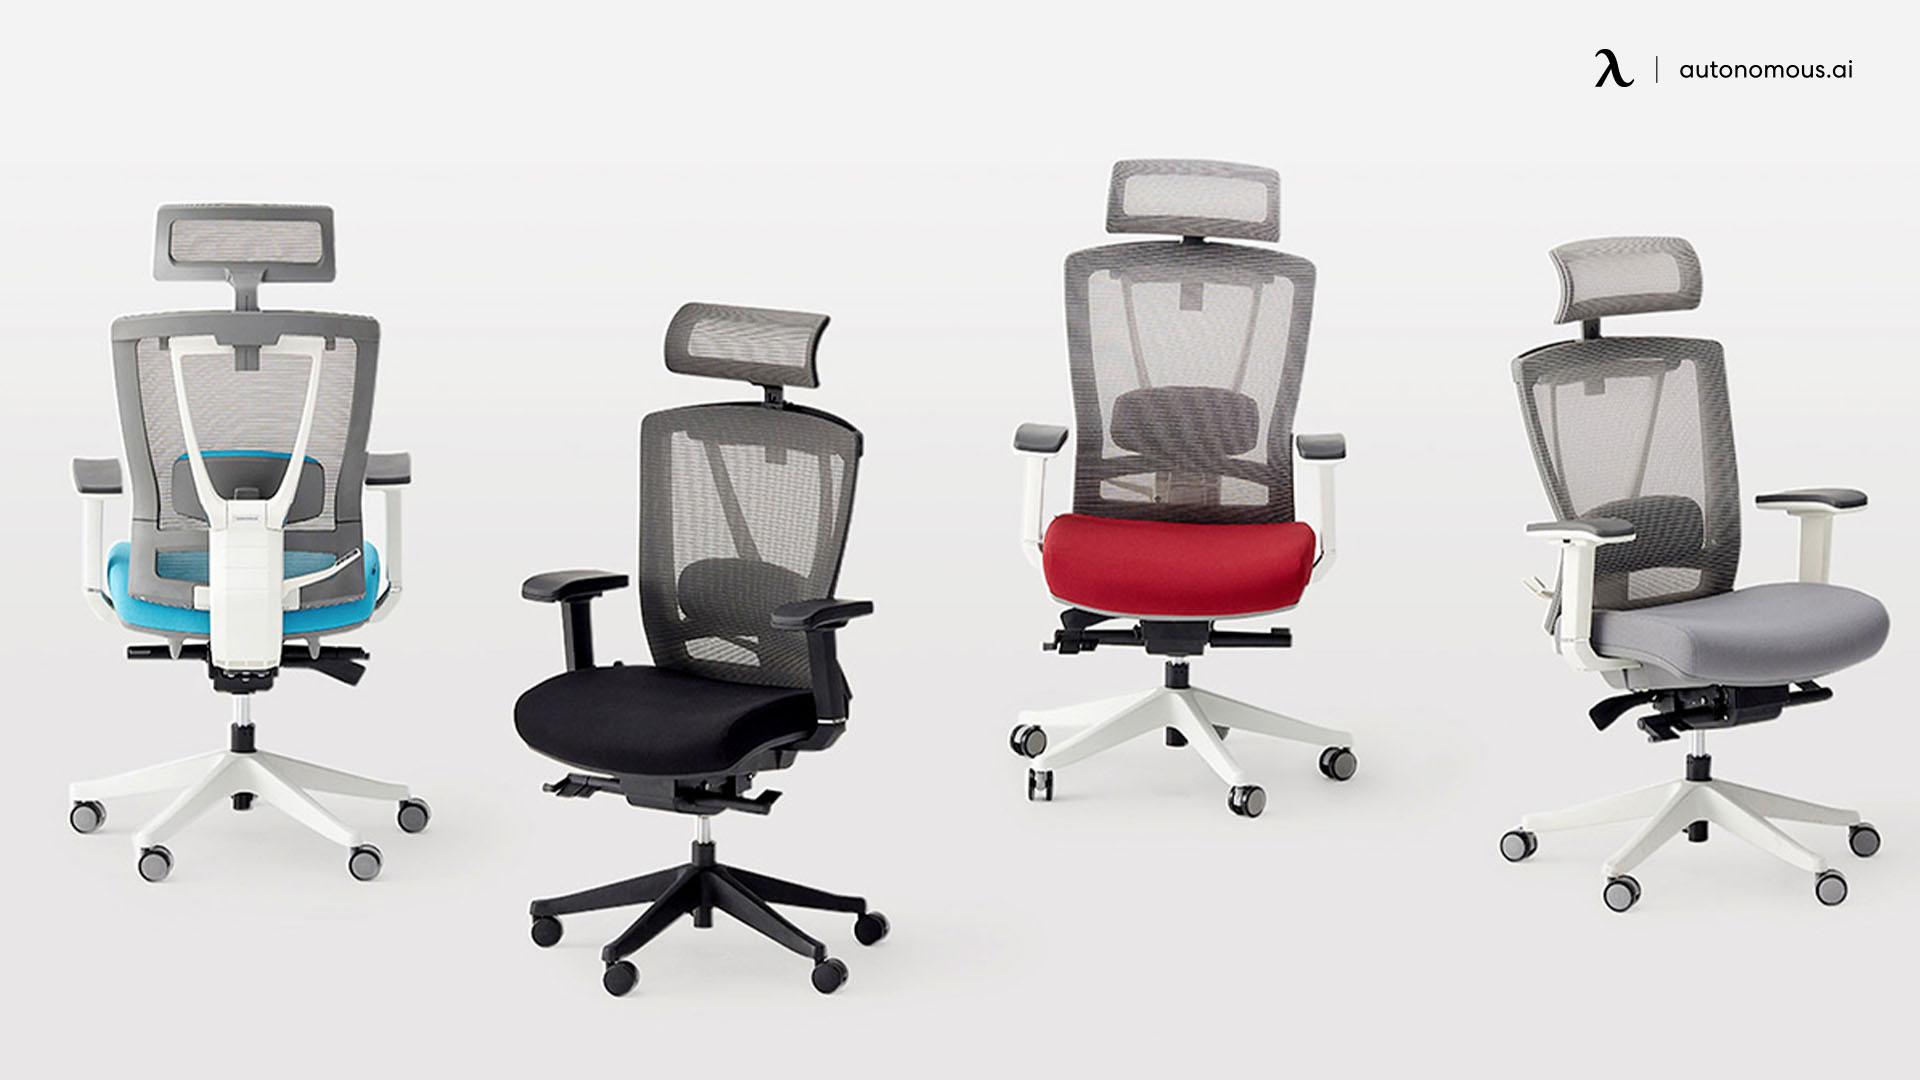 Lumbar Support Office Chairs